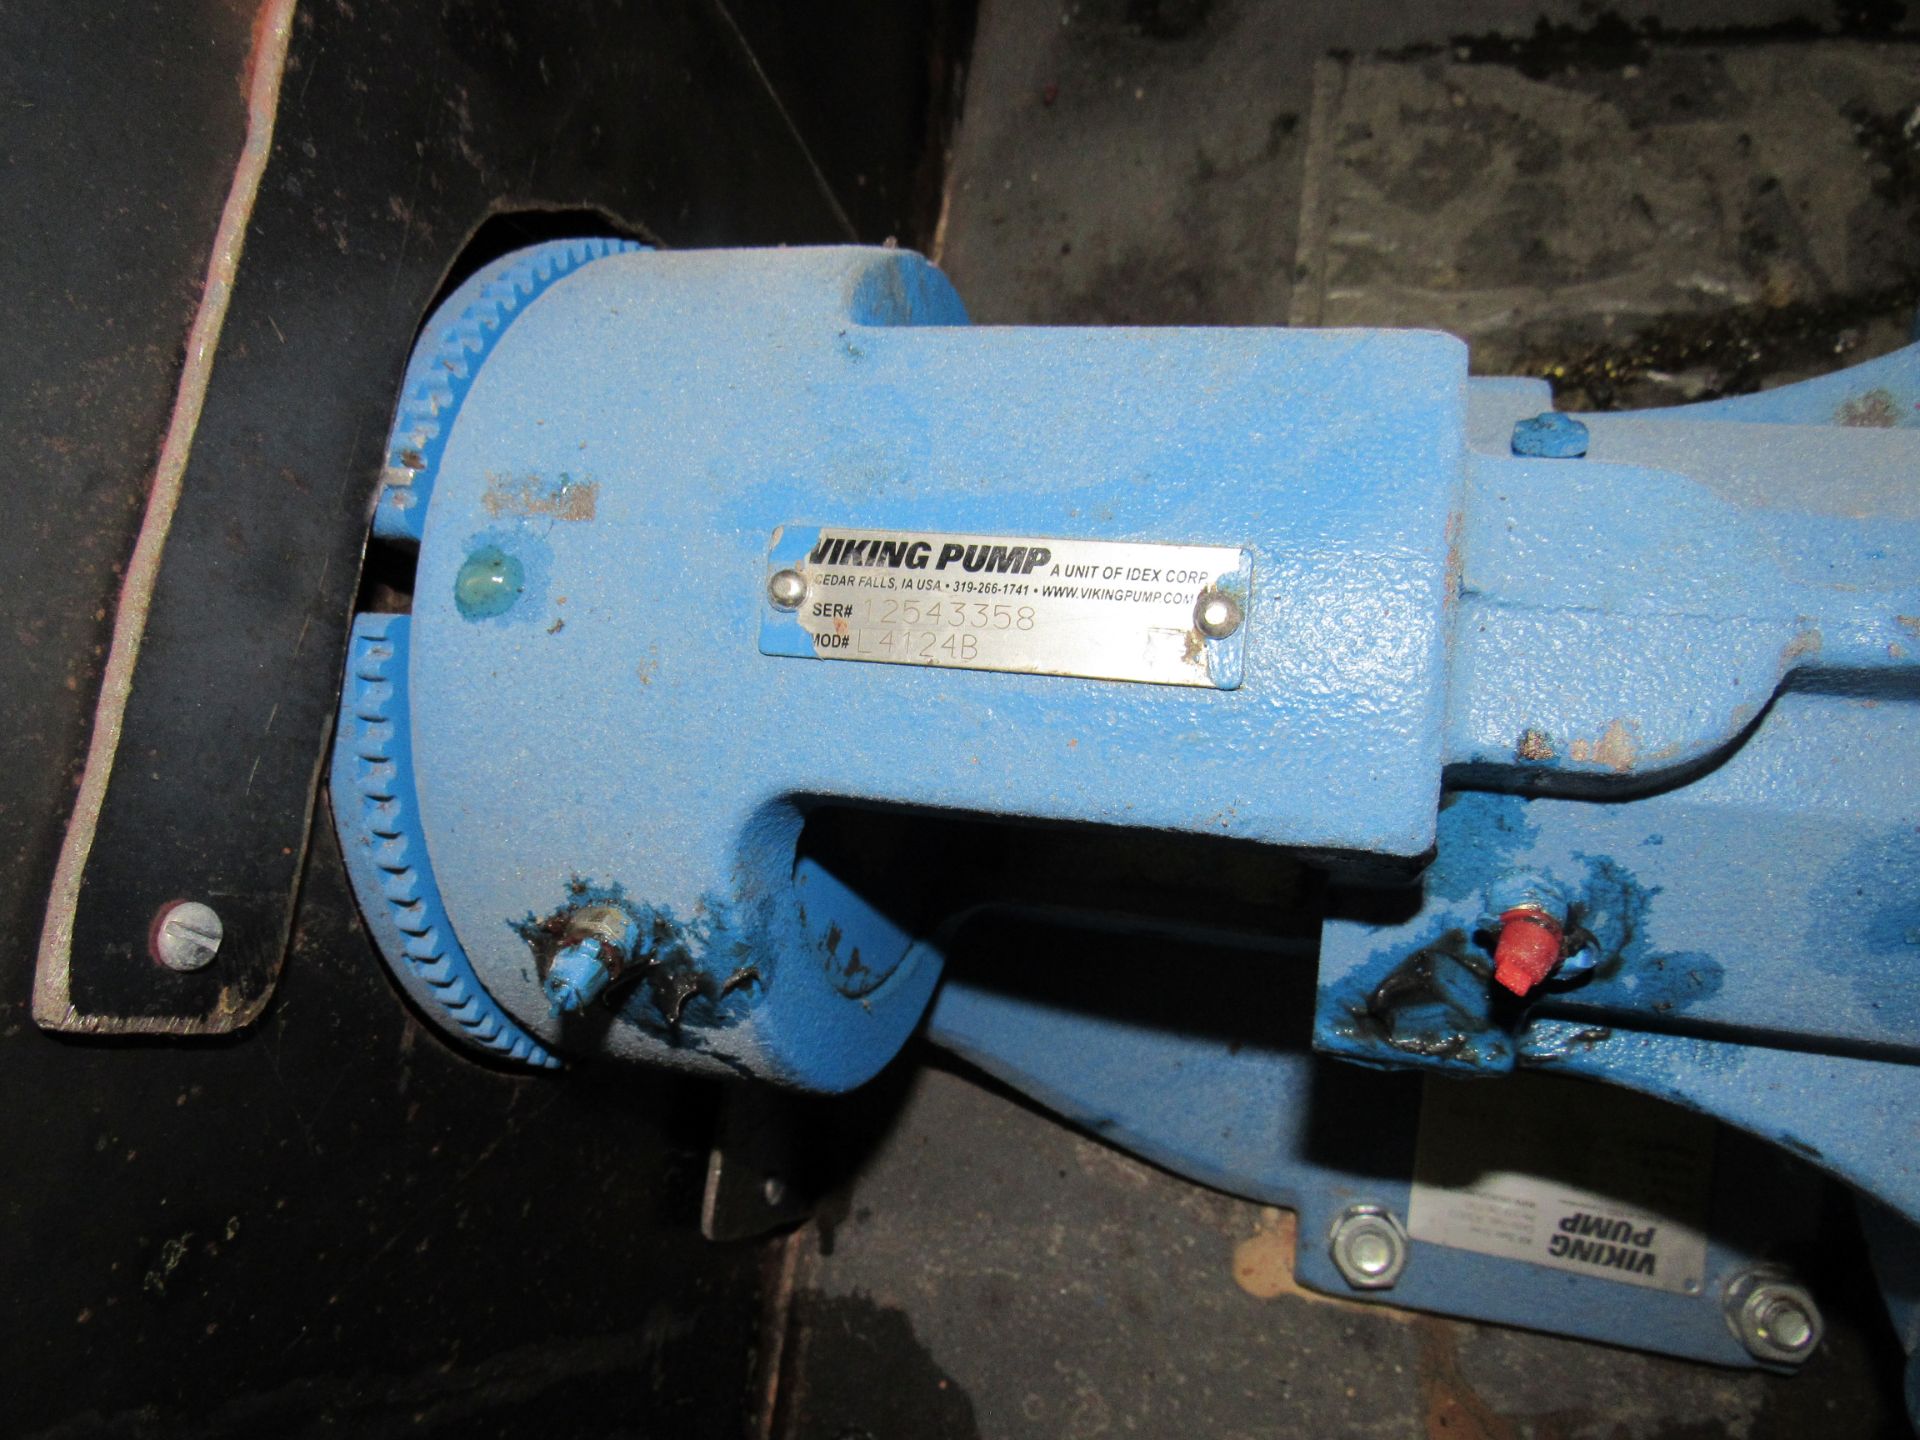 Viking Pump Model L4124B, Serial #12543358, 2" inlet and outlet with relief valve, 3HP Motor -Free - Image 10 of 14